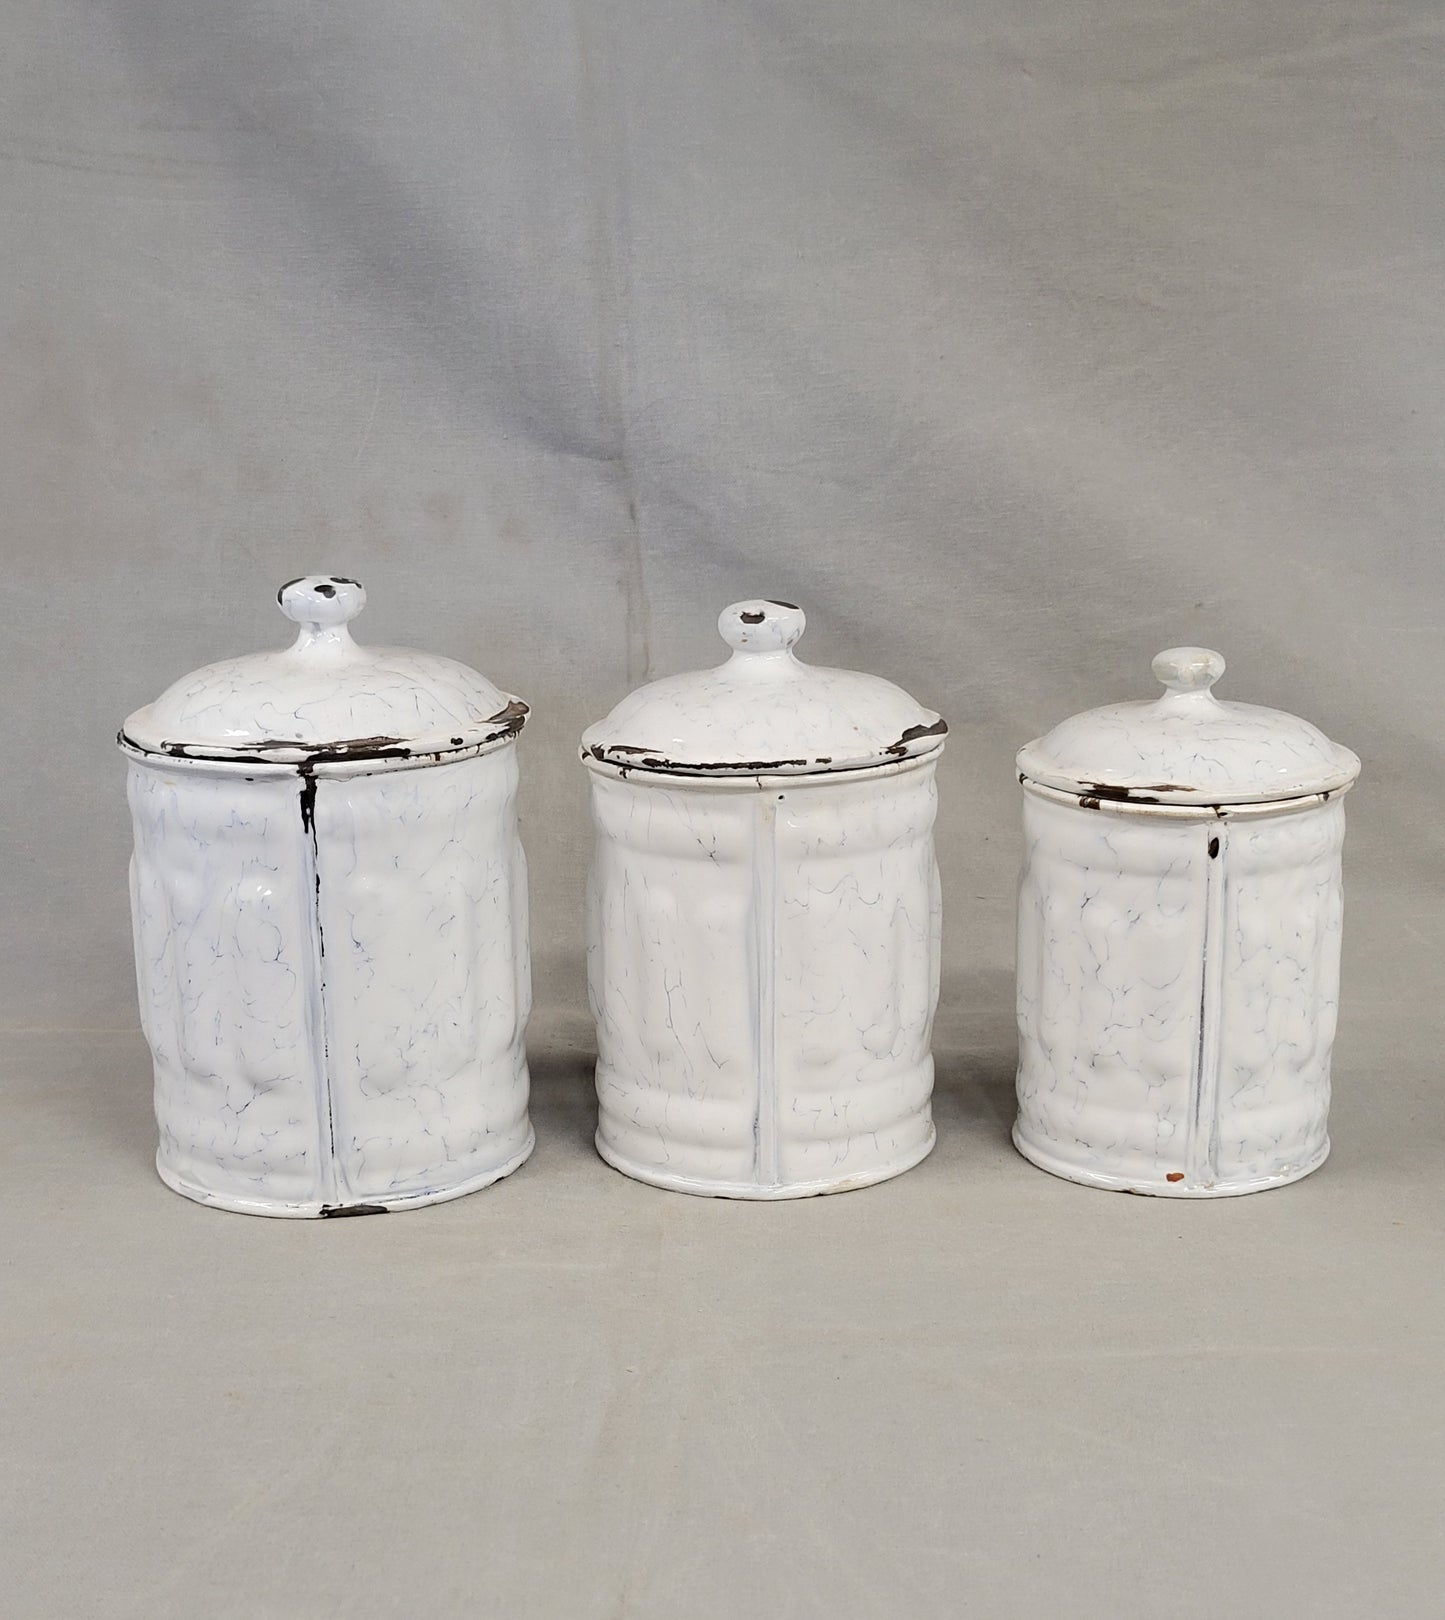 Antique French White and Blue Enamel Canister Set - 6 Pieces